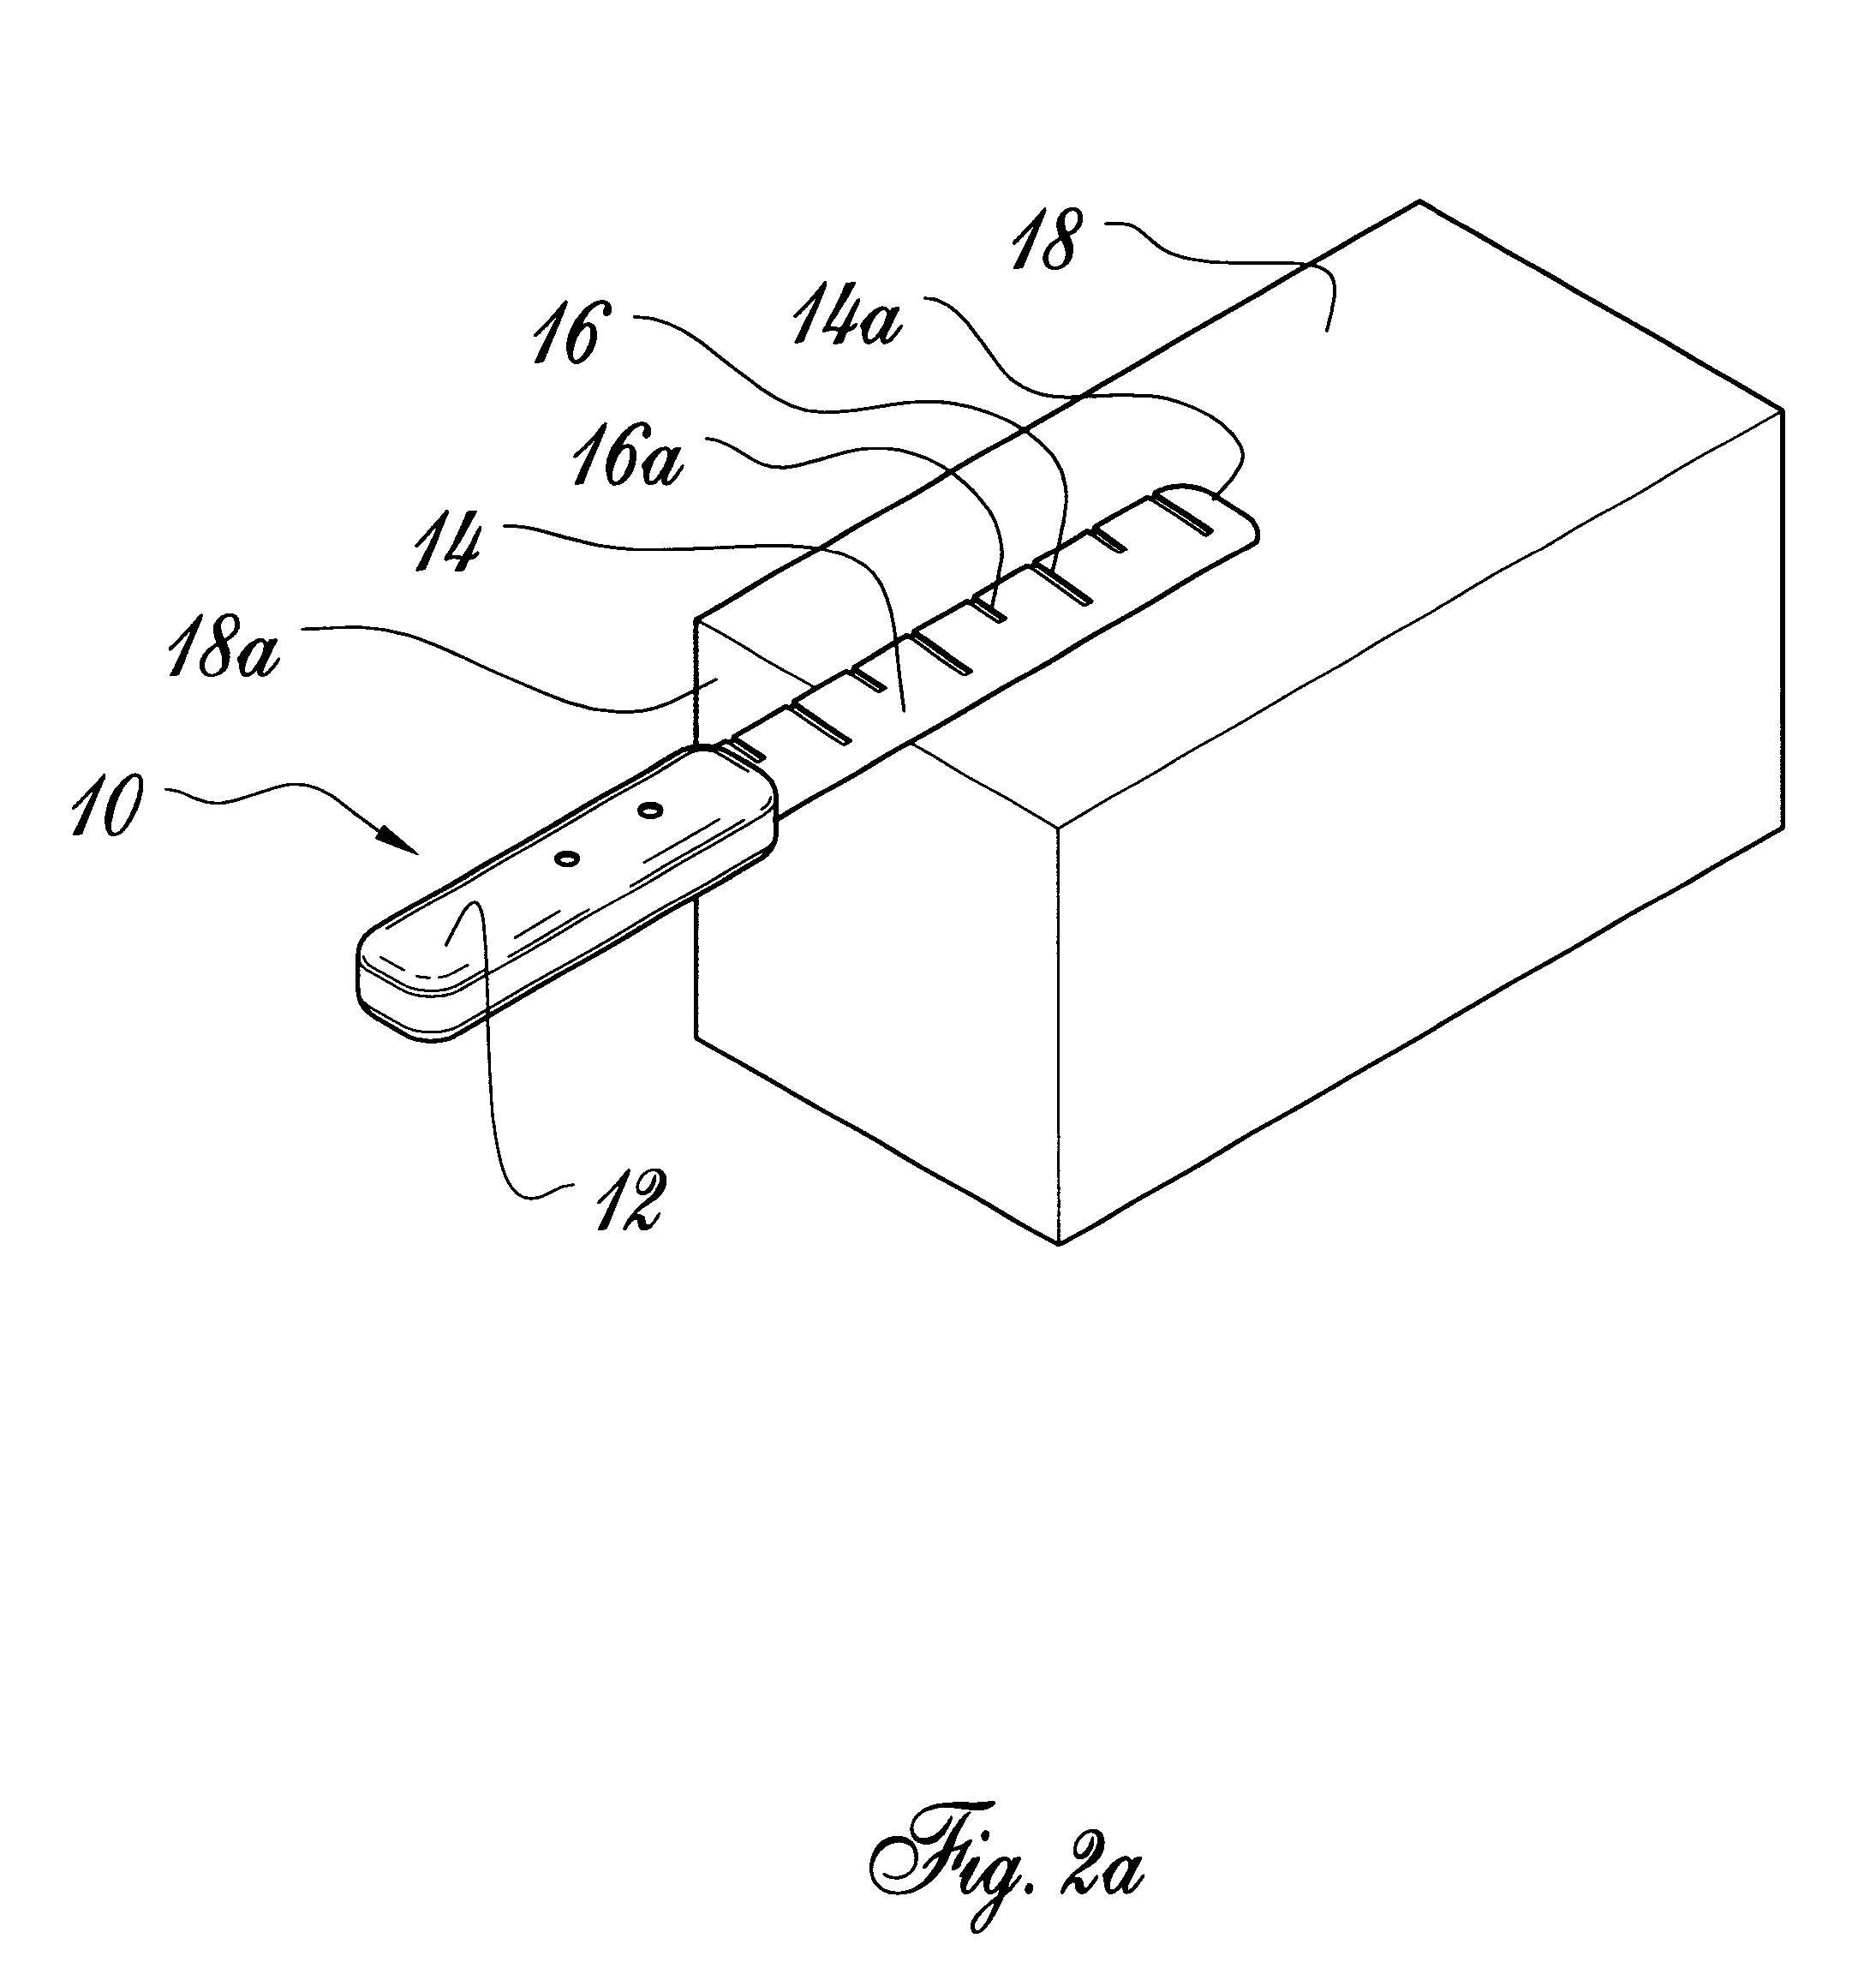 Graduated food-cutting knife and method of use thereof